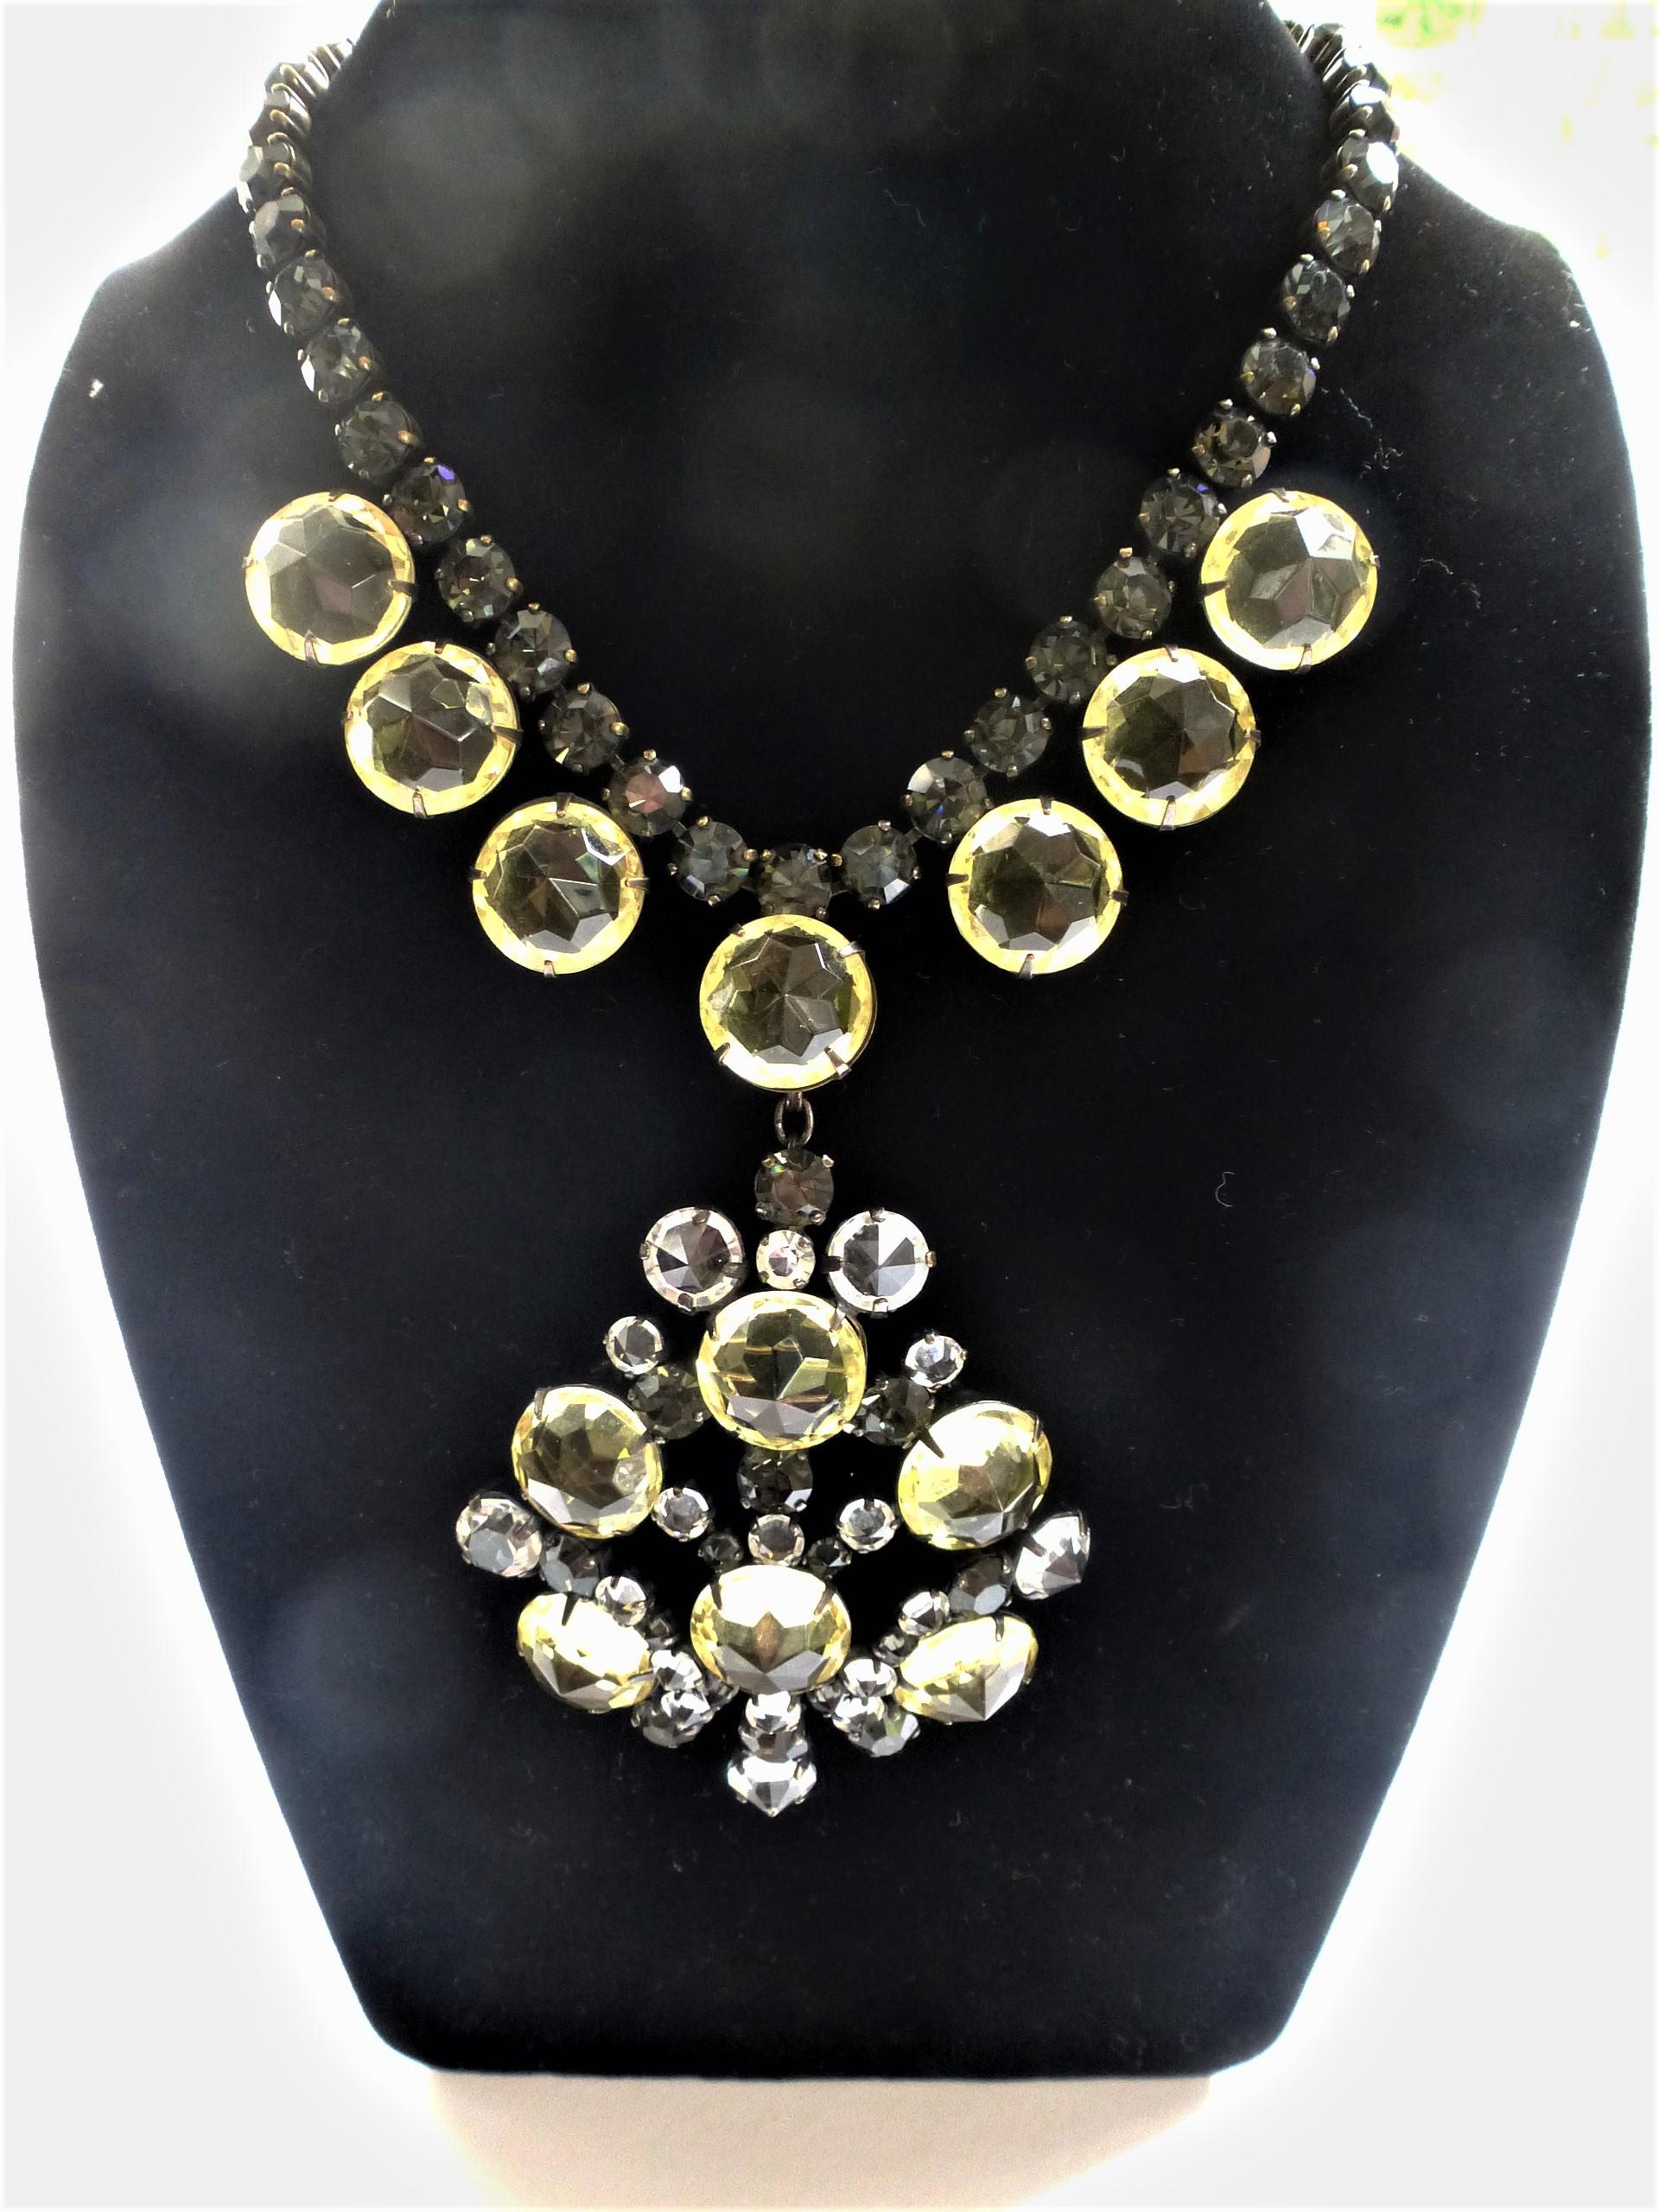 Important and impressive Schreiner NY pendant necklace with big yellow and clear cut stones. Transformable necklace detachable pendant wich becomes a large brooch. Crafted in gunmetal and set with exceptional array of crystals as is the hallmark of